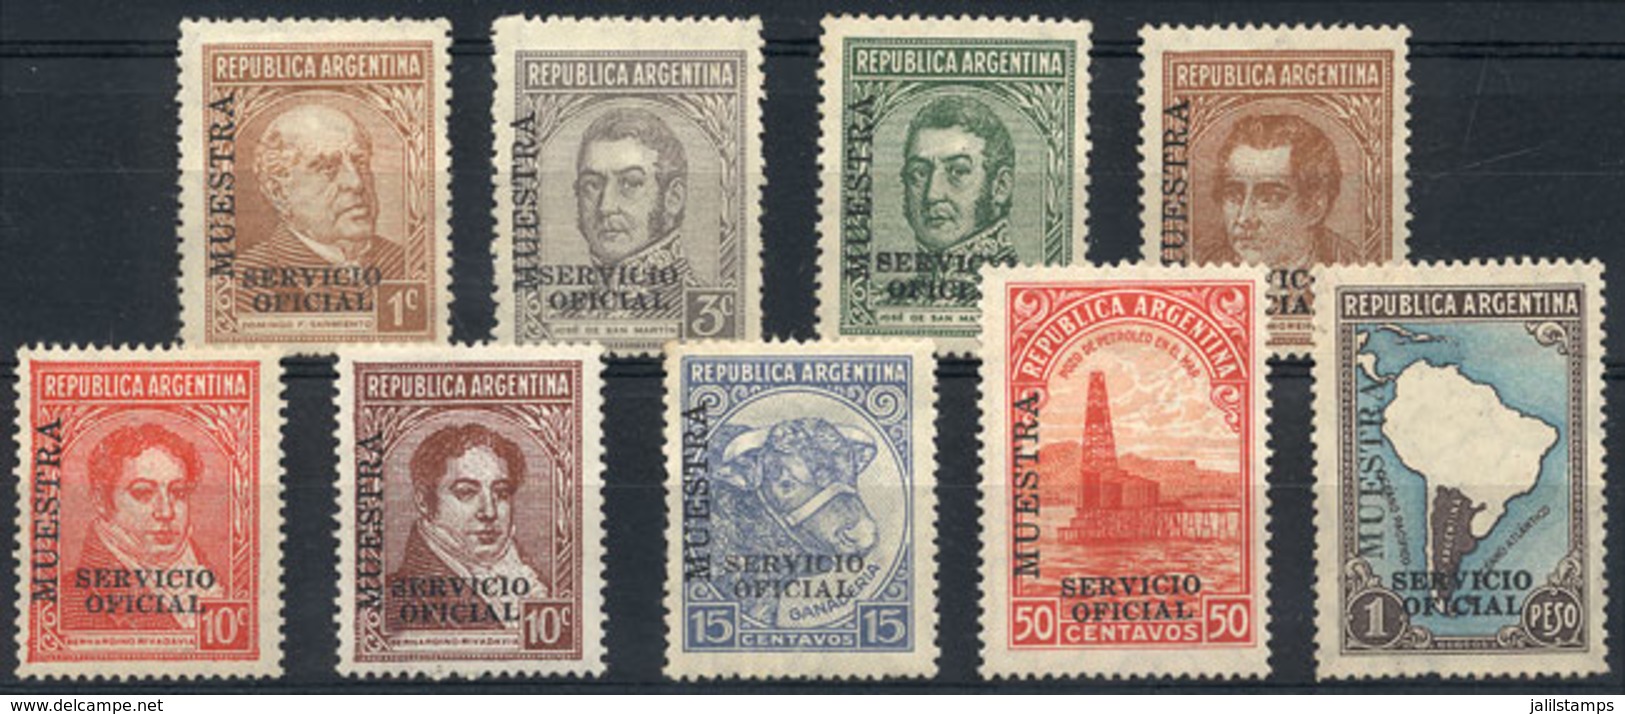 ARGENTINA: GJ.630 + Other Values, 9 Stamps Of The Proceres & Riquezas I Issue With MUESTRA Ovpt, VF Quality, Rare! - Service